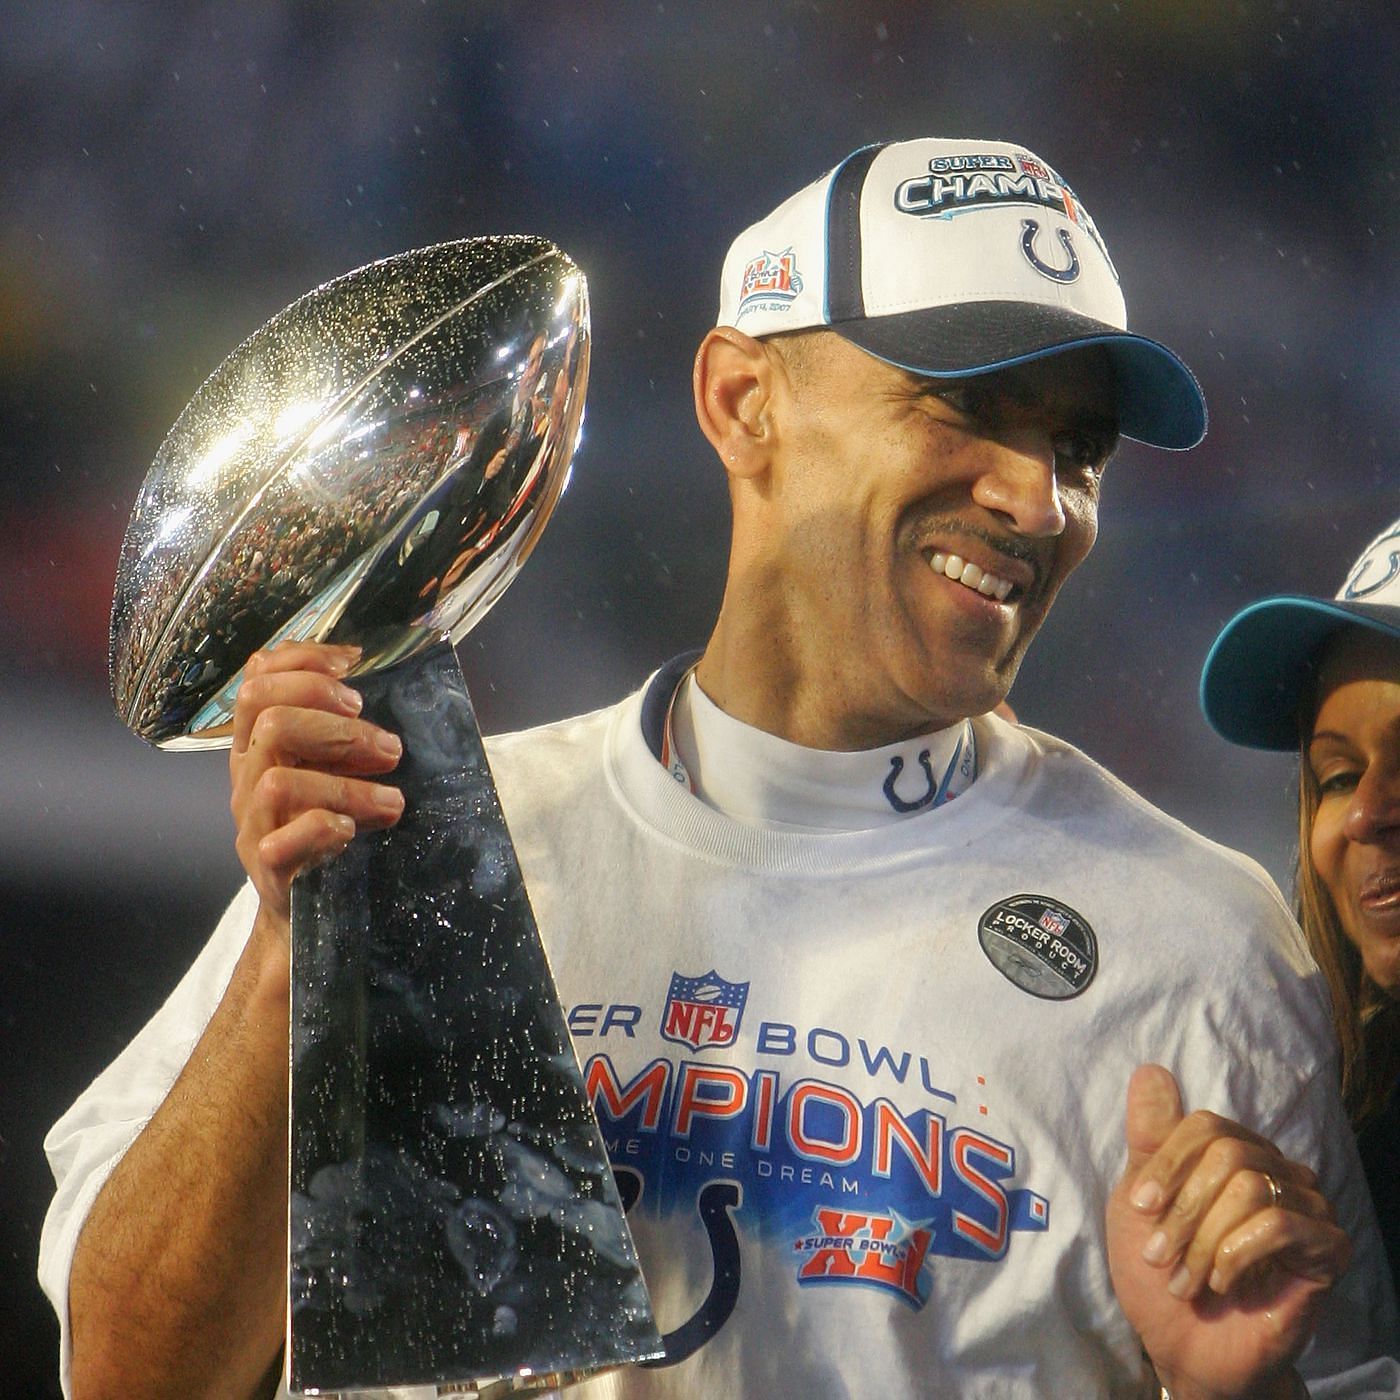 Tony Dungy winning the Super Bowl with the Colts in 2007